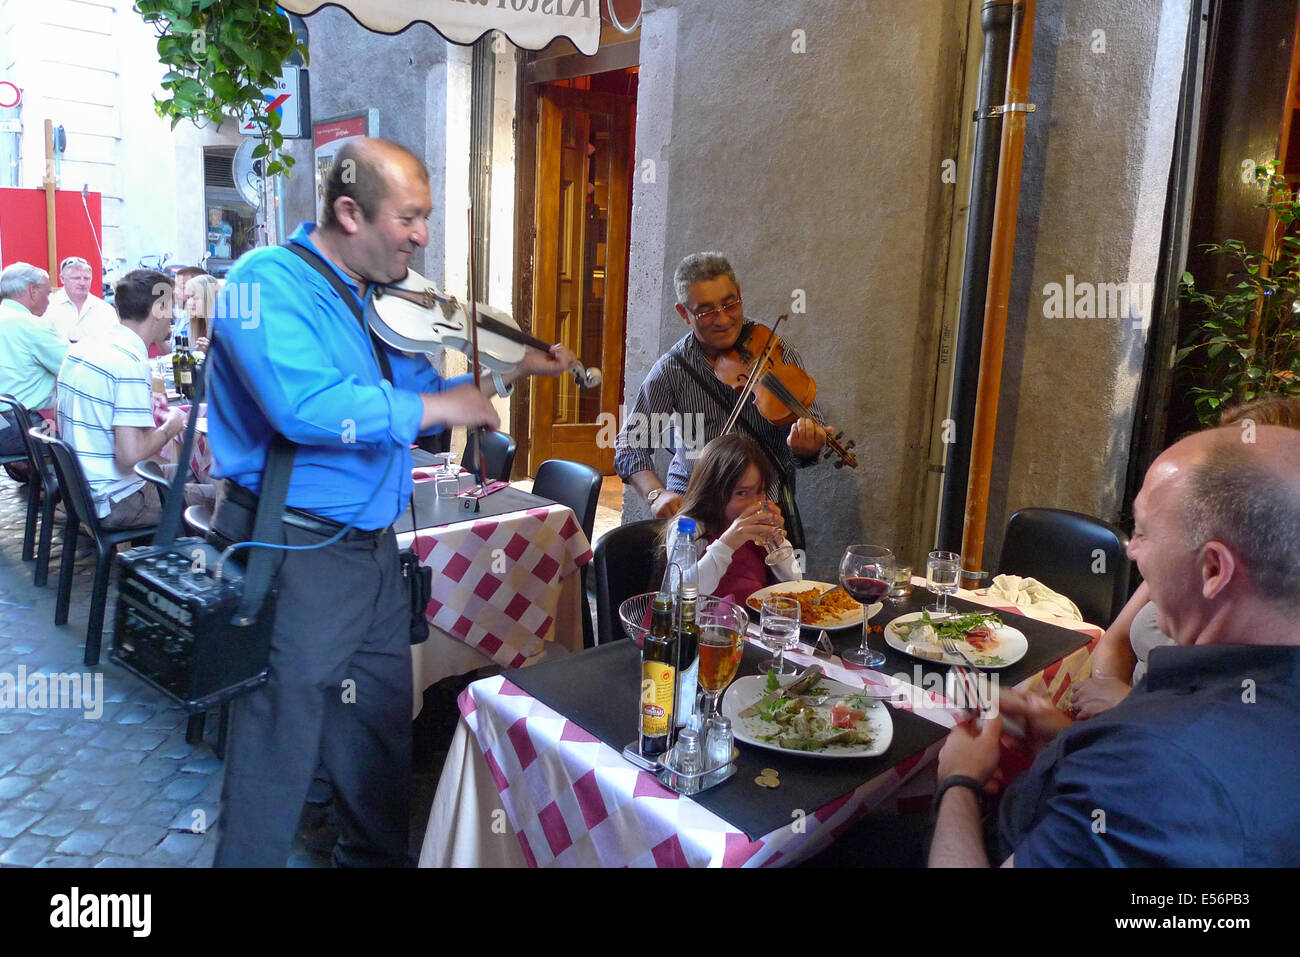 Musicians serenade people eating at a restaurant, In Rome, Italy. Stock Photo